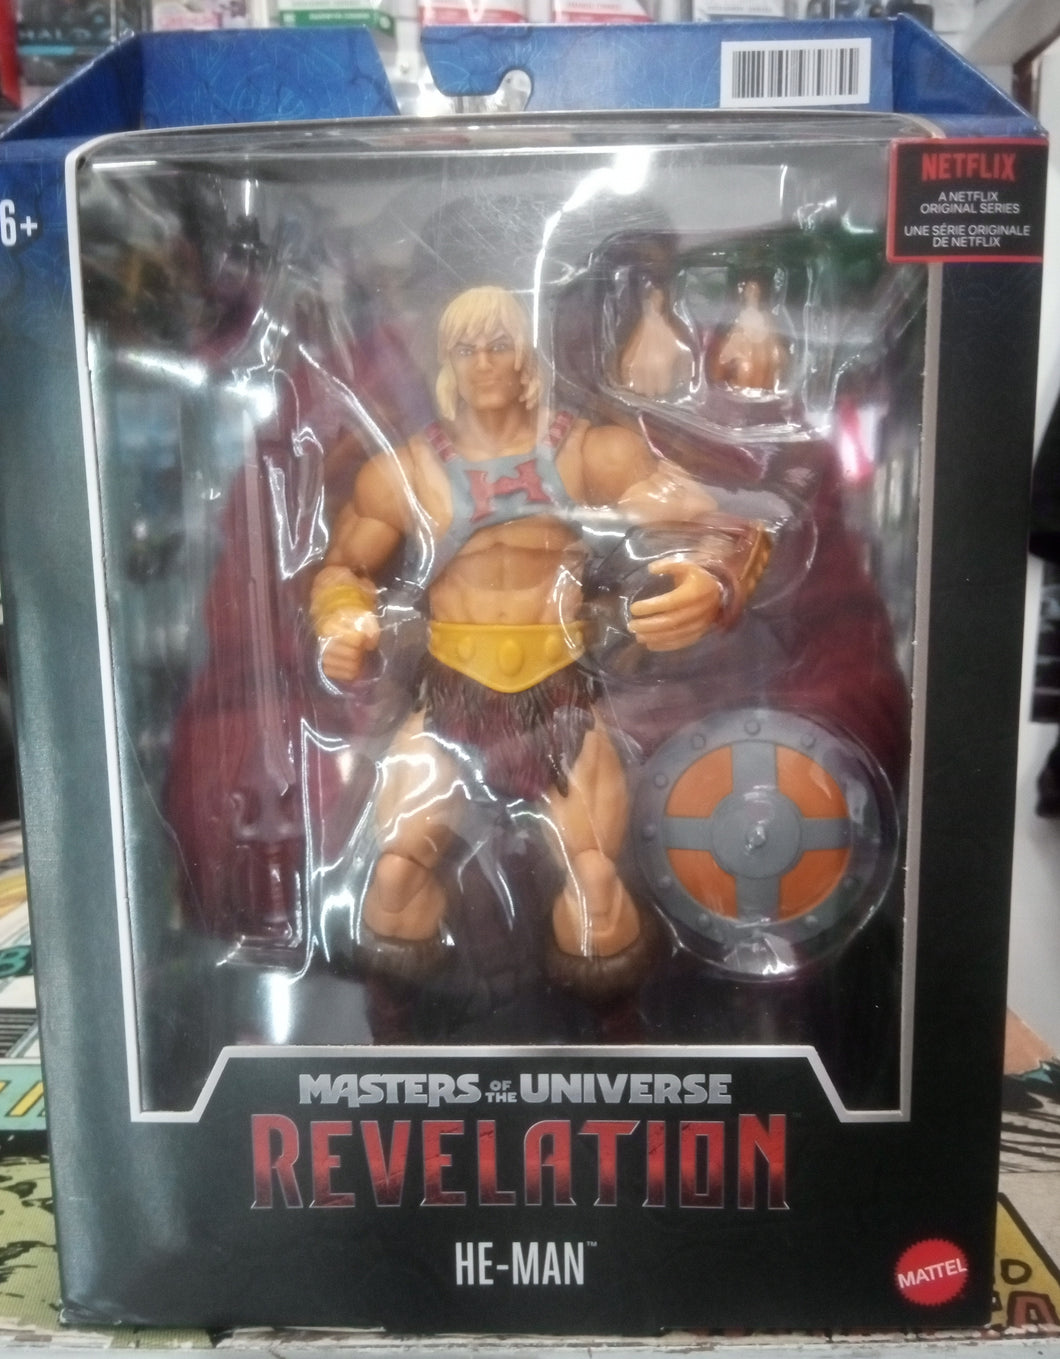 MASTERS OF THE UNIVERSE REVELATIONS HE-MAN FIGURE